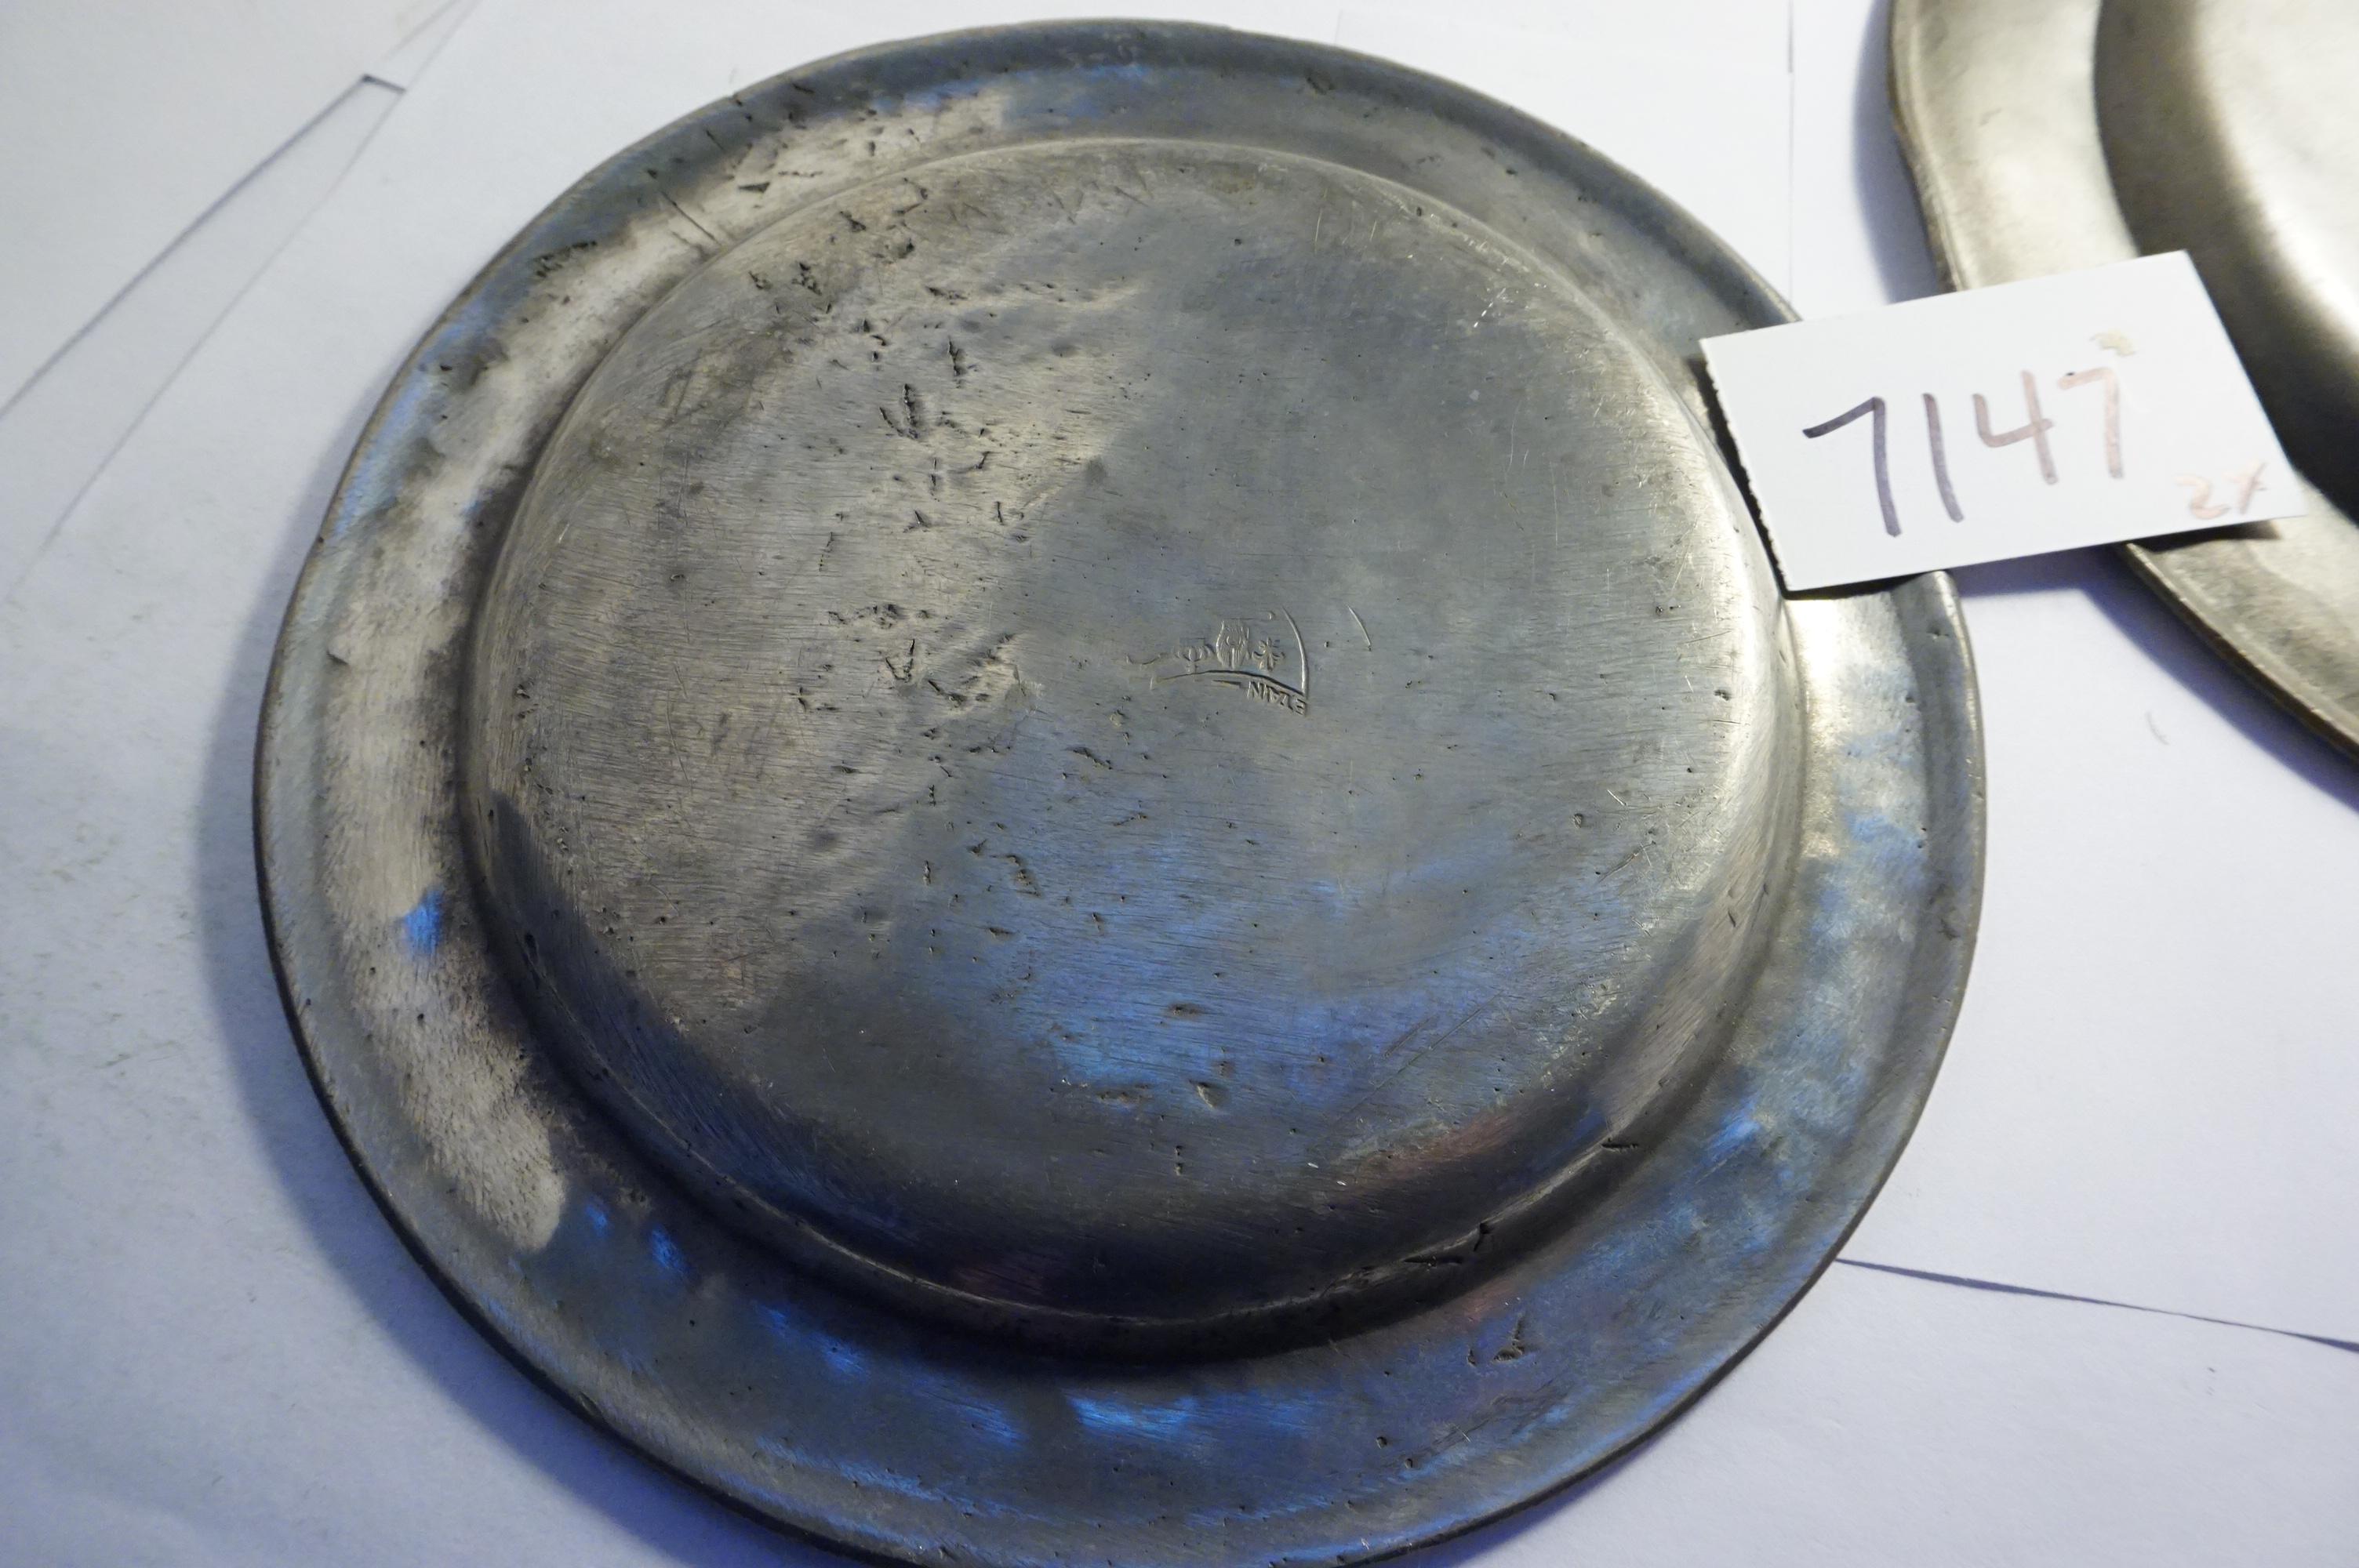 TWO (2) X The Money: Pewter Plates, OLD, 7" and 8.375". Estate Find, PEWTER, OLD